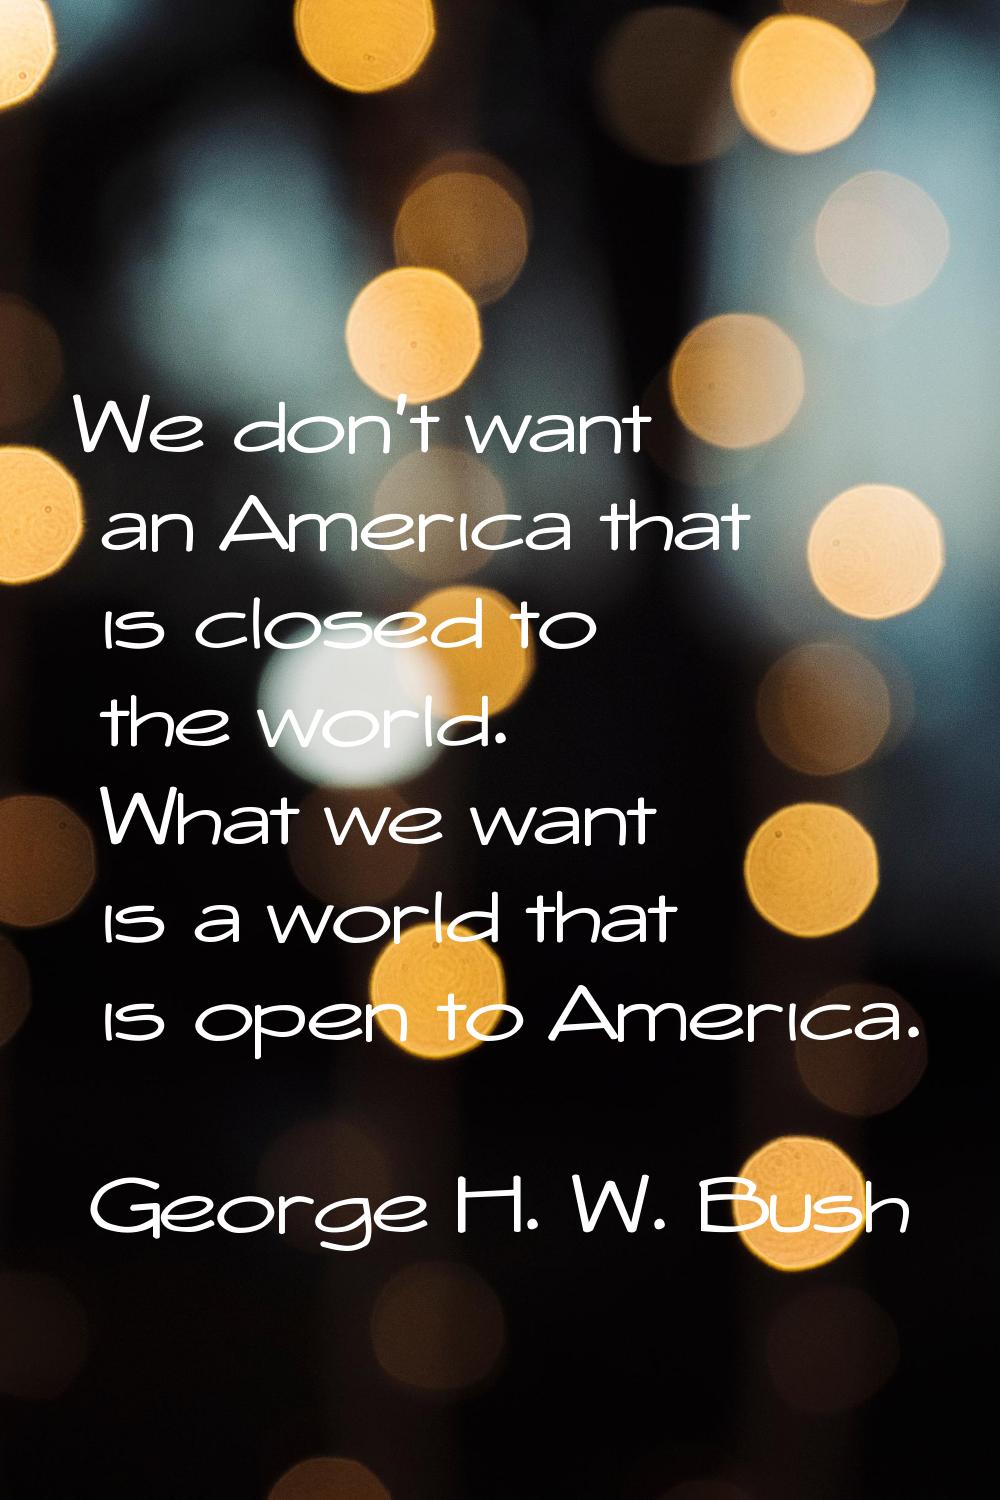 We don't want an America that is closed to the world. What we want is a world that is open to Ameri